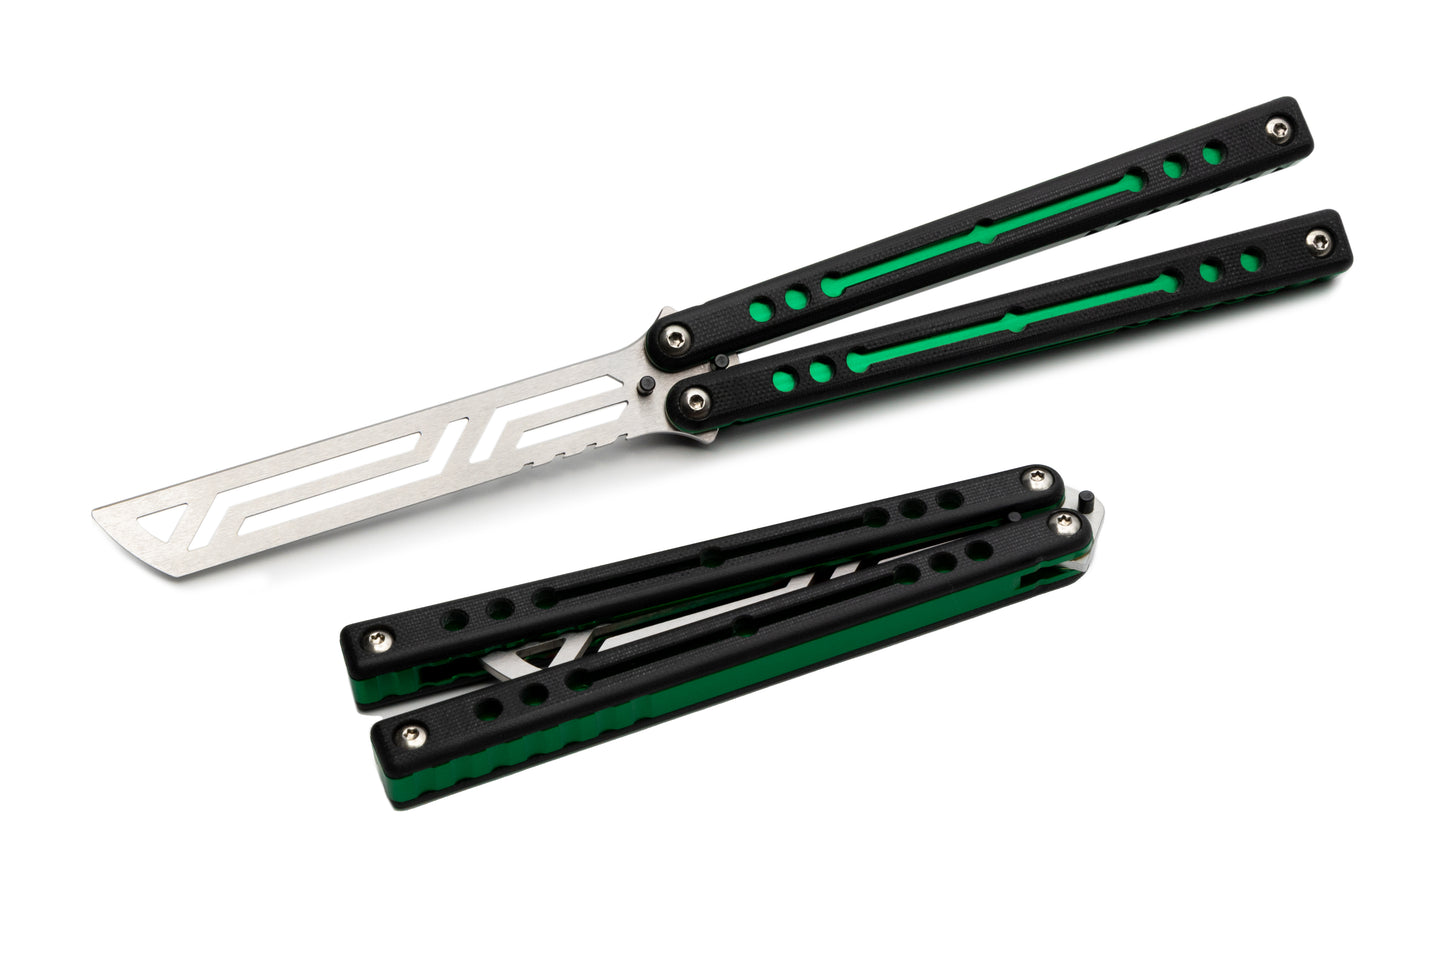 Green NautilusV2 balisong with g10 scales